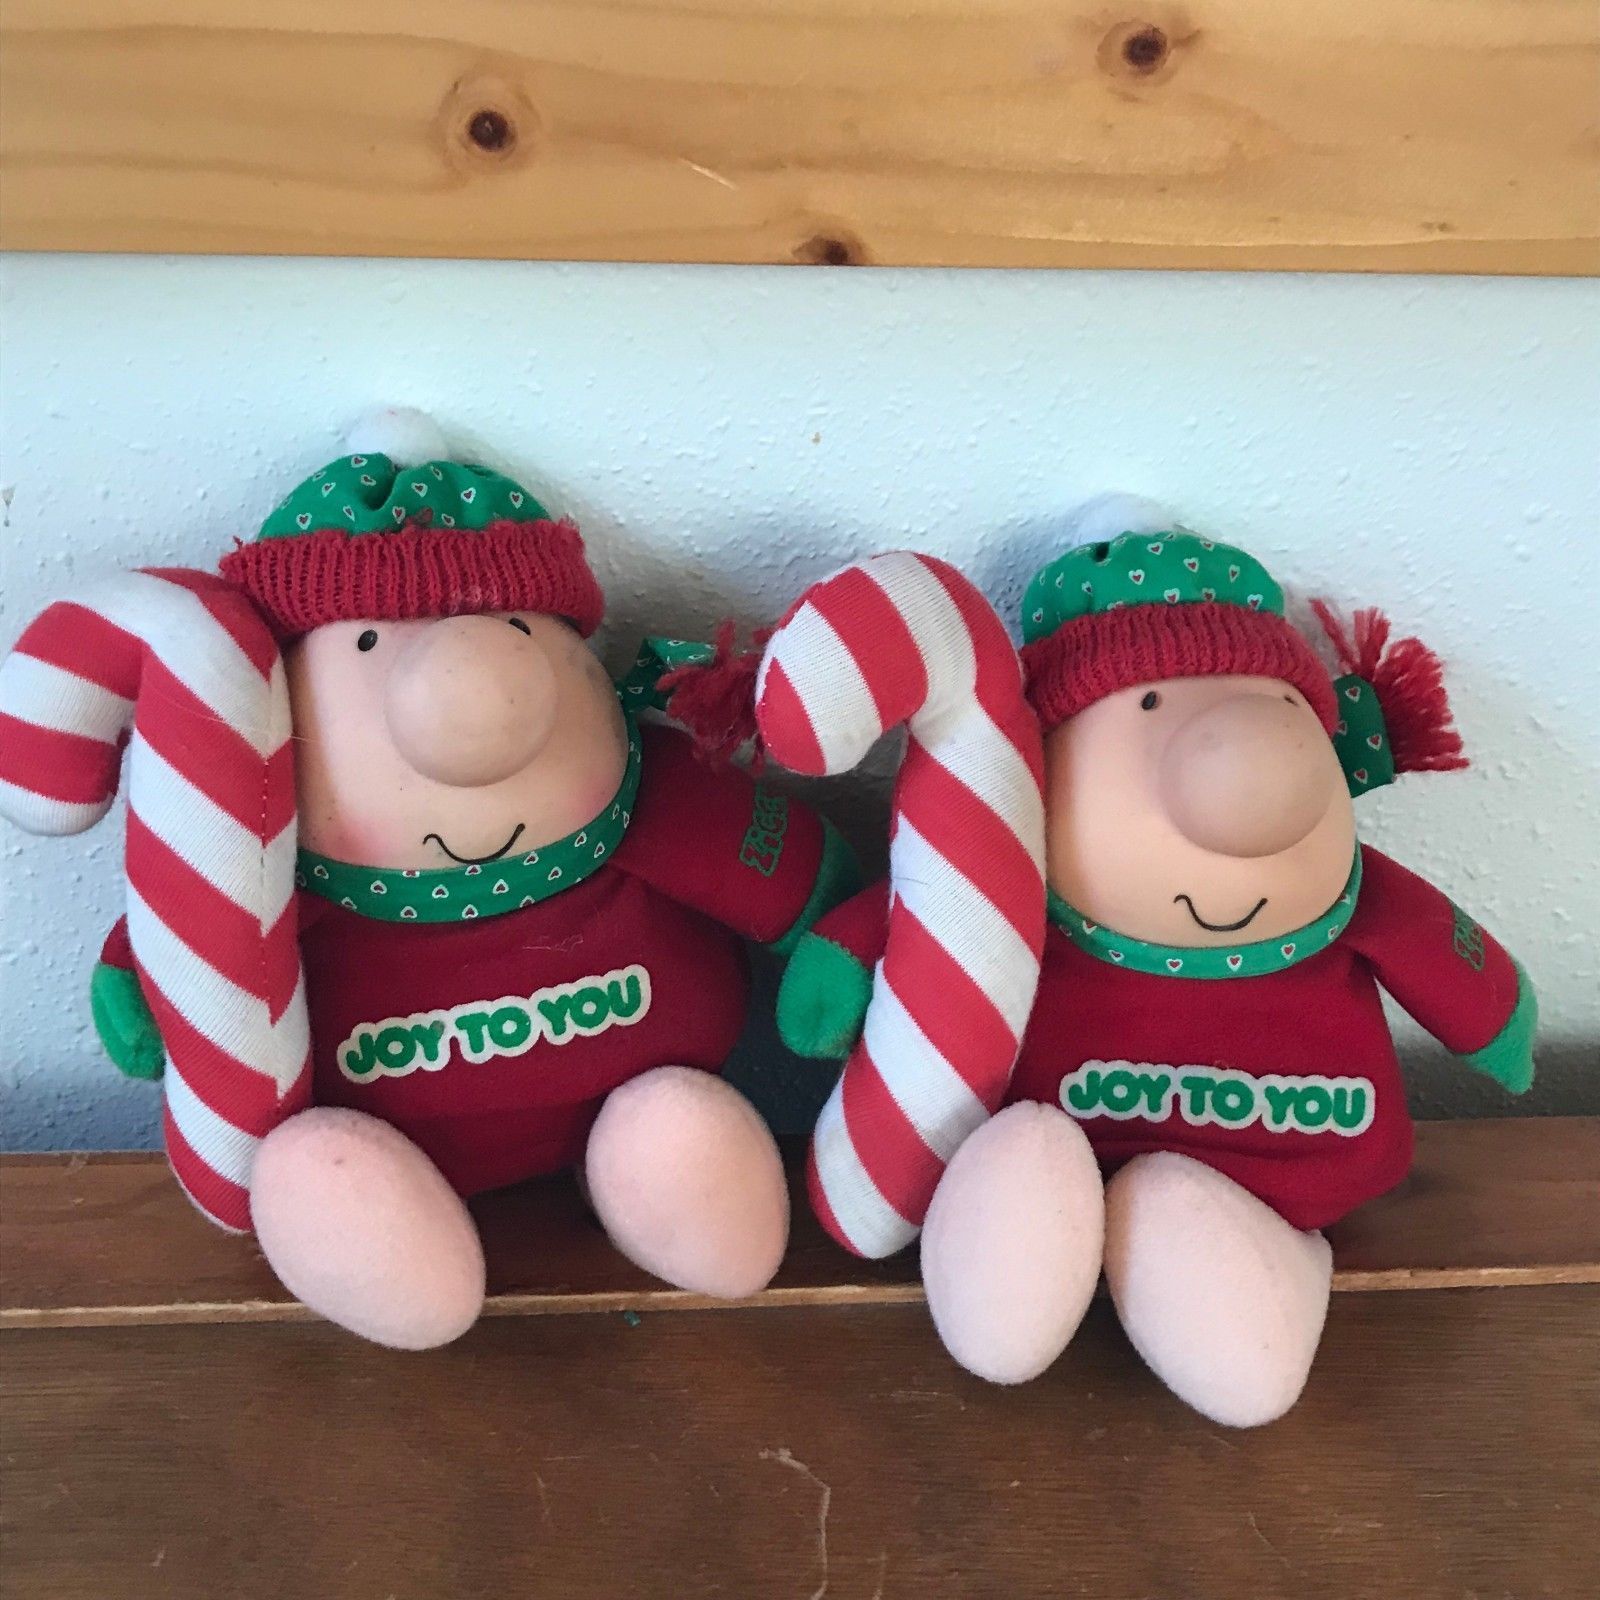 Vintage Lot of 2 American Greetings Christmas Holiday Stuffed Ziggy Doll with  - $10.39